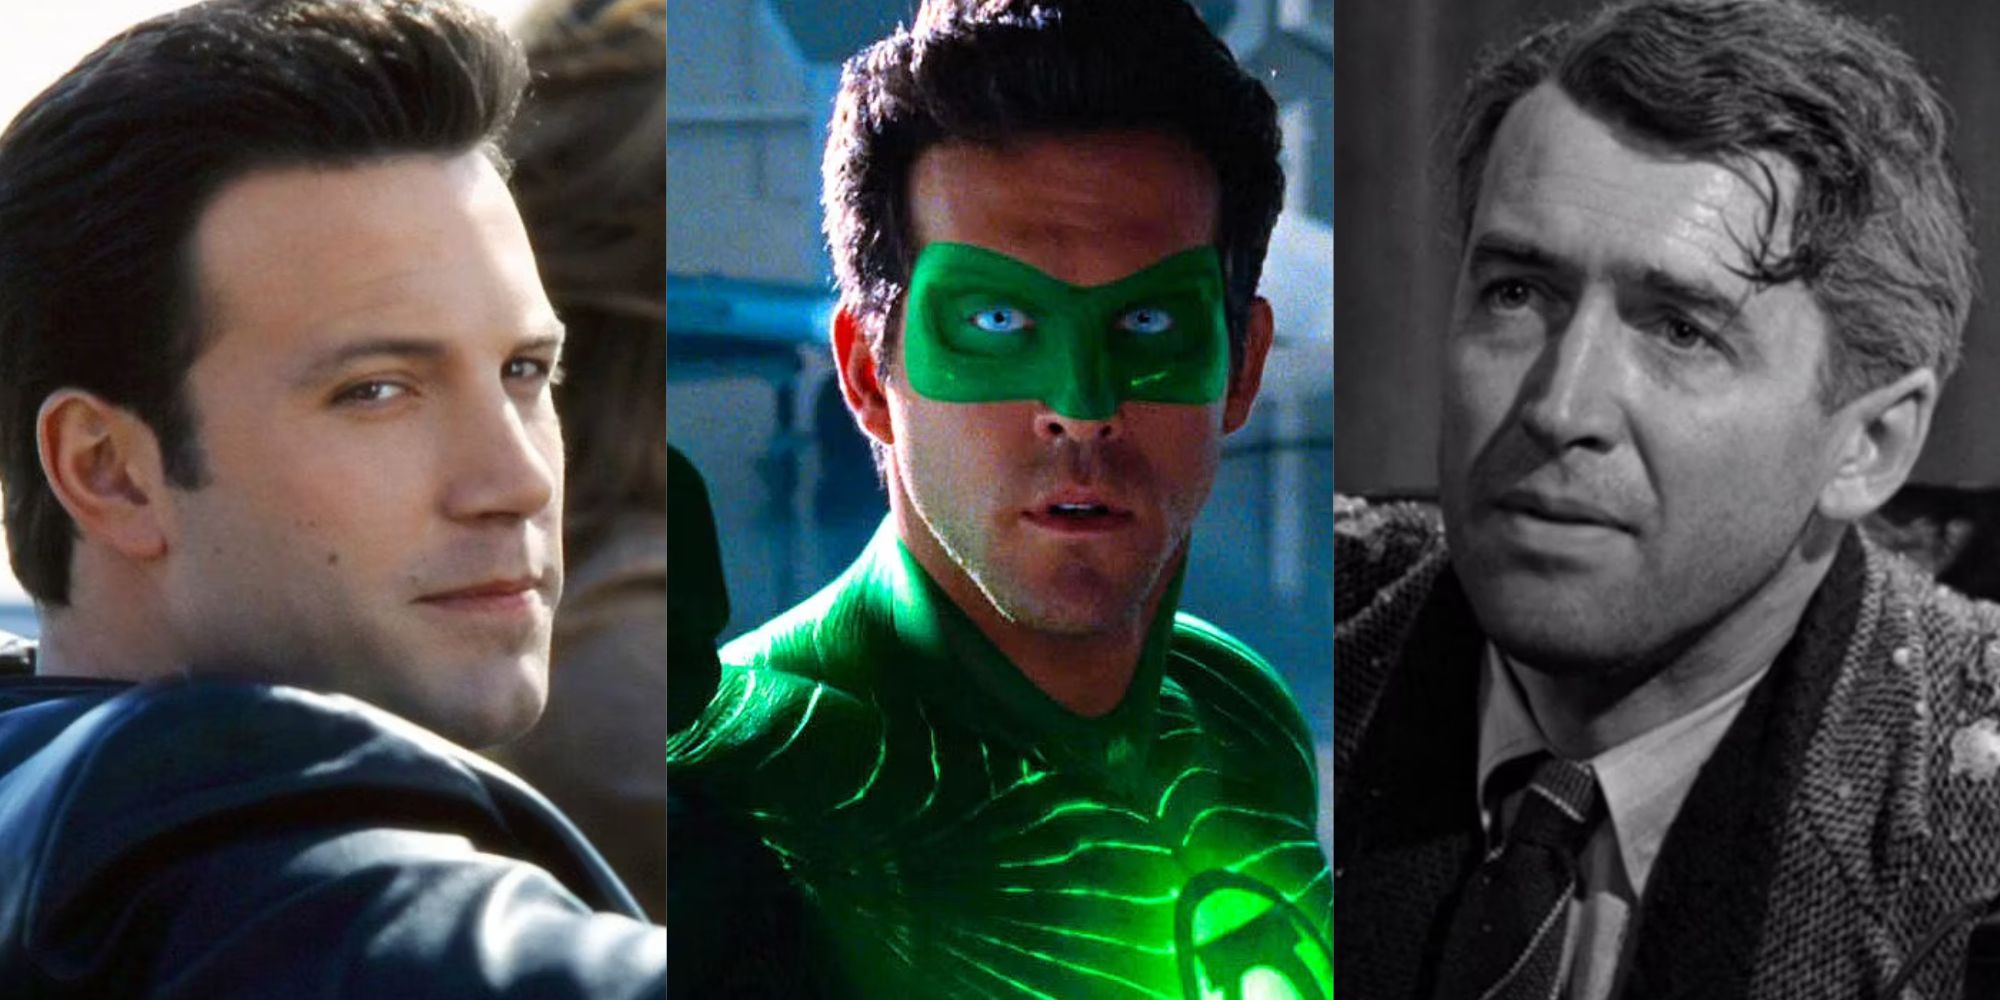 A split image of Gigli, Green Lantern, and It's A Wonderful Life.